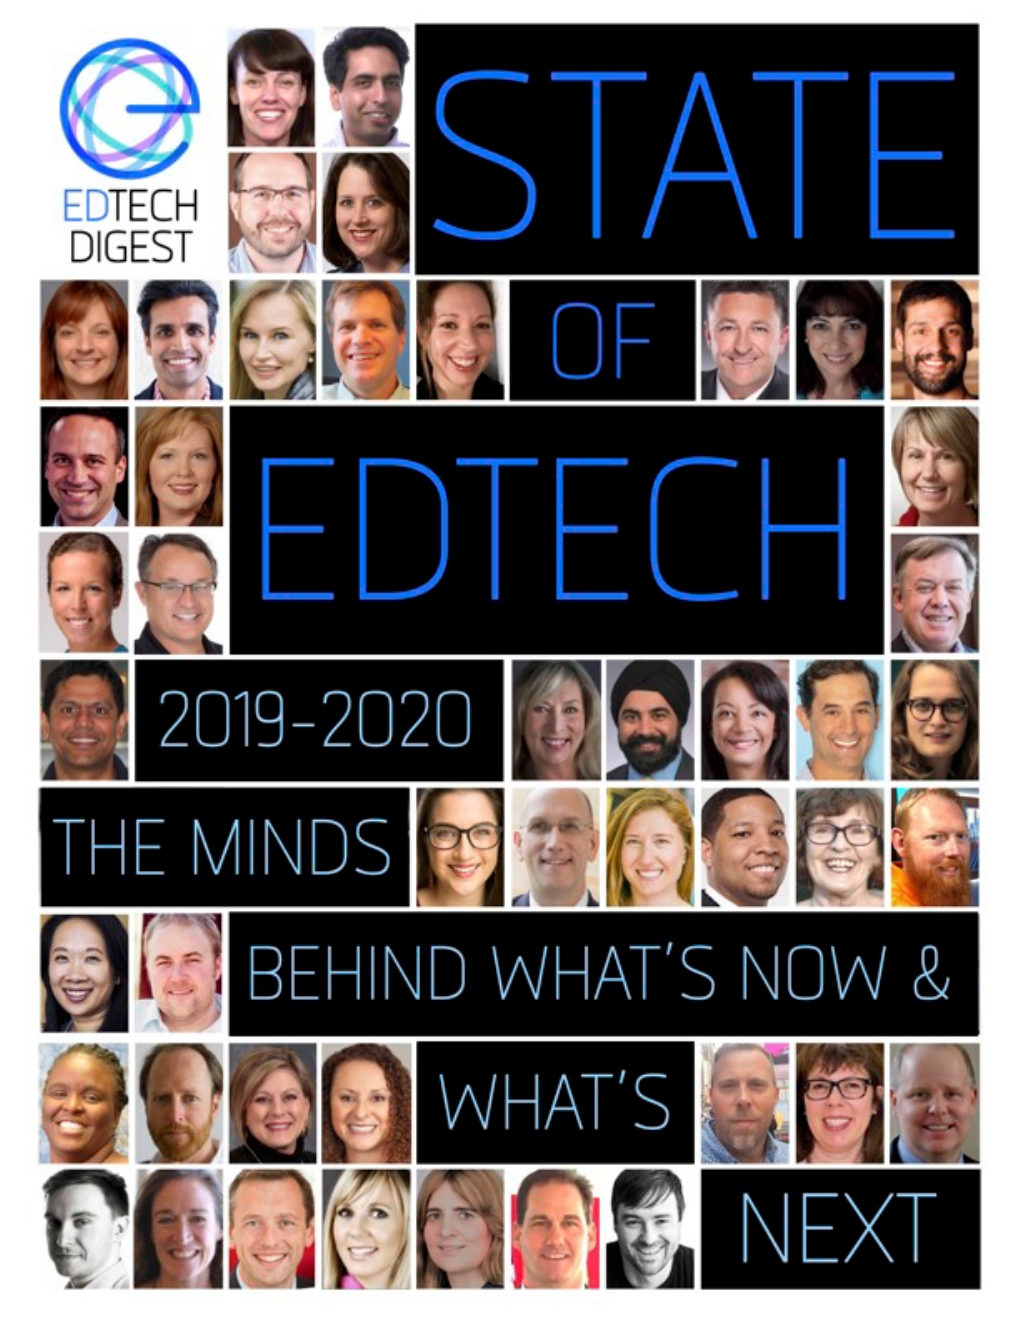 State of Edtech 2019-2020:The Minds Behind What's Now